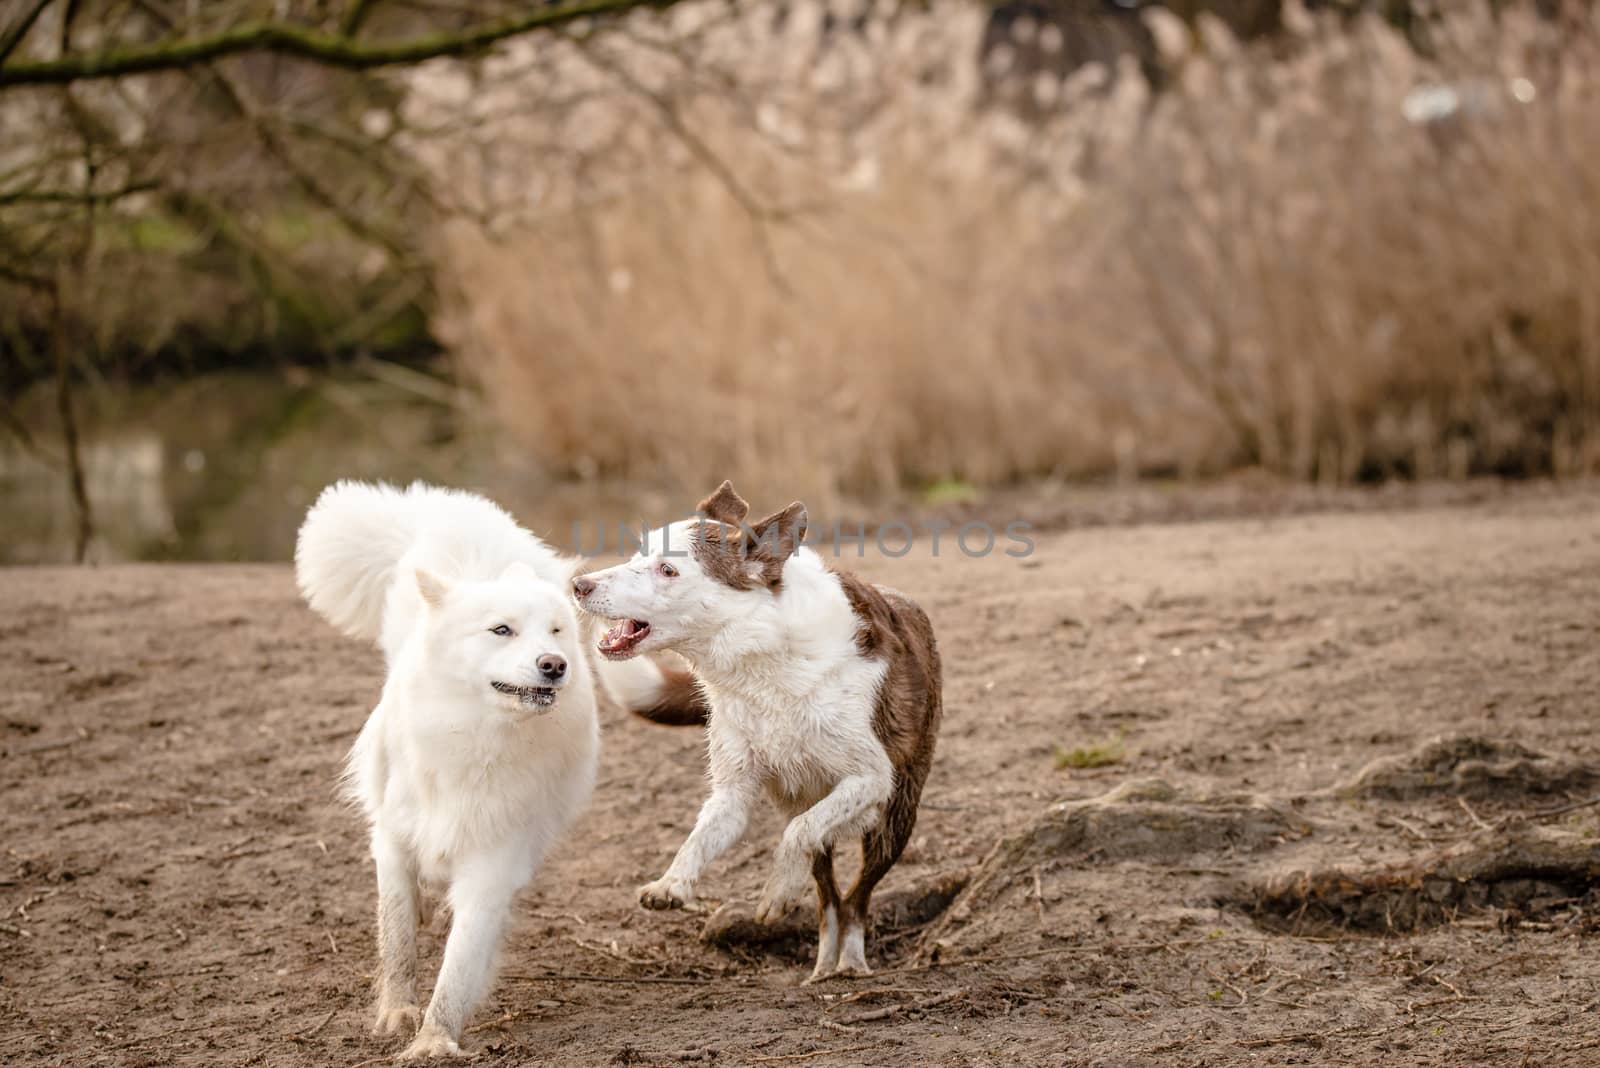 Cute, fluffy white Samoyed dog and her Border Collie friend